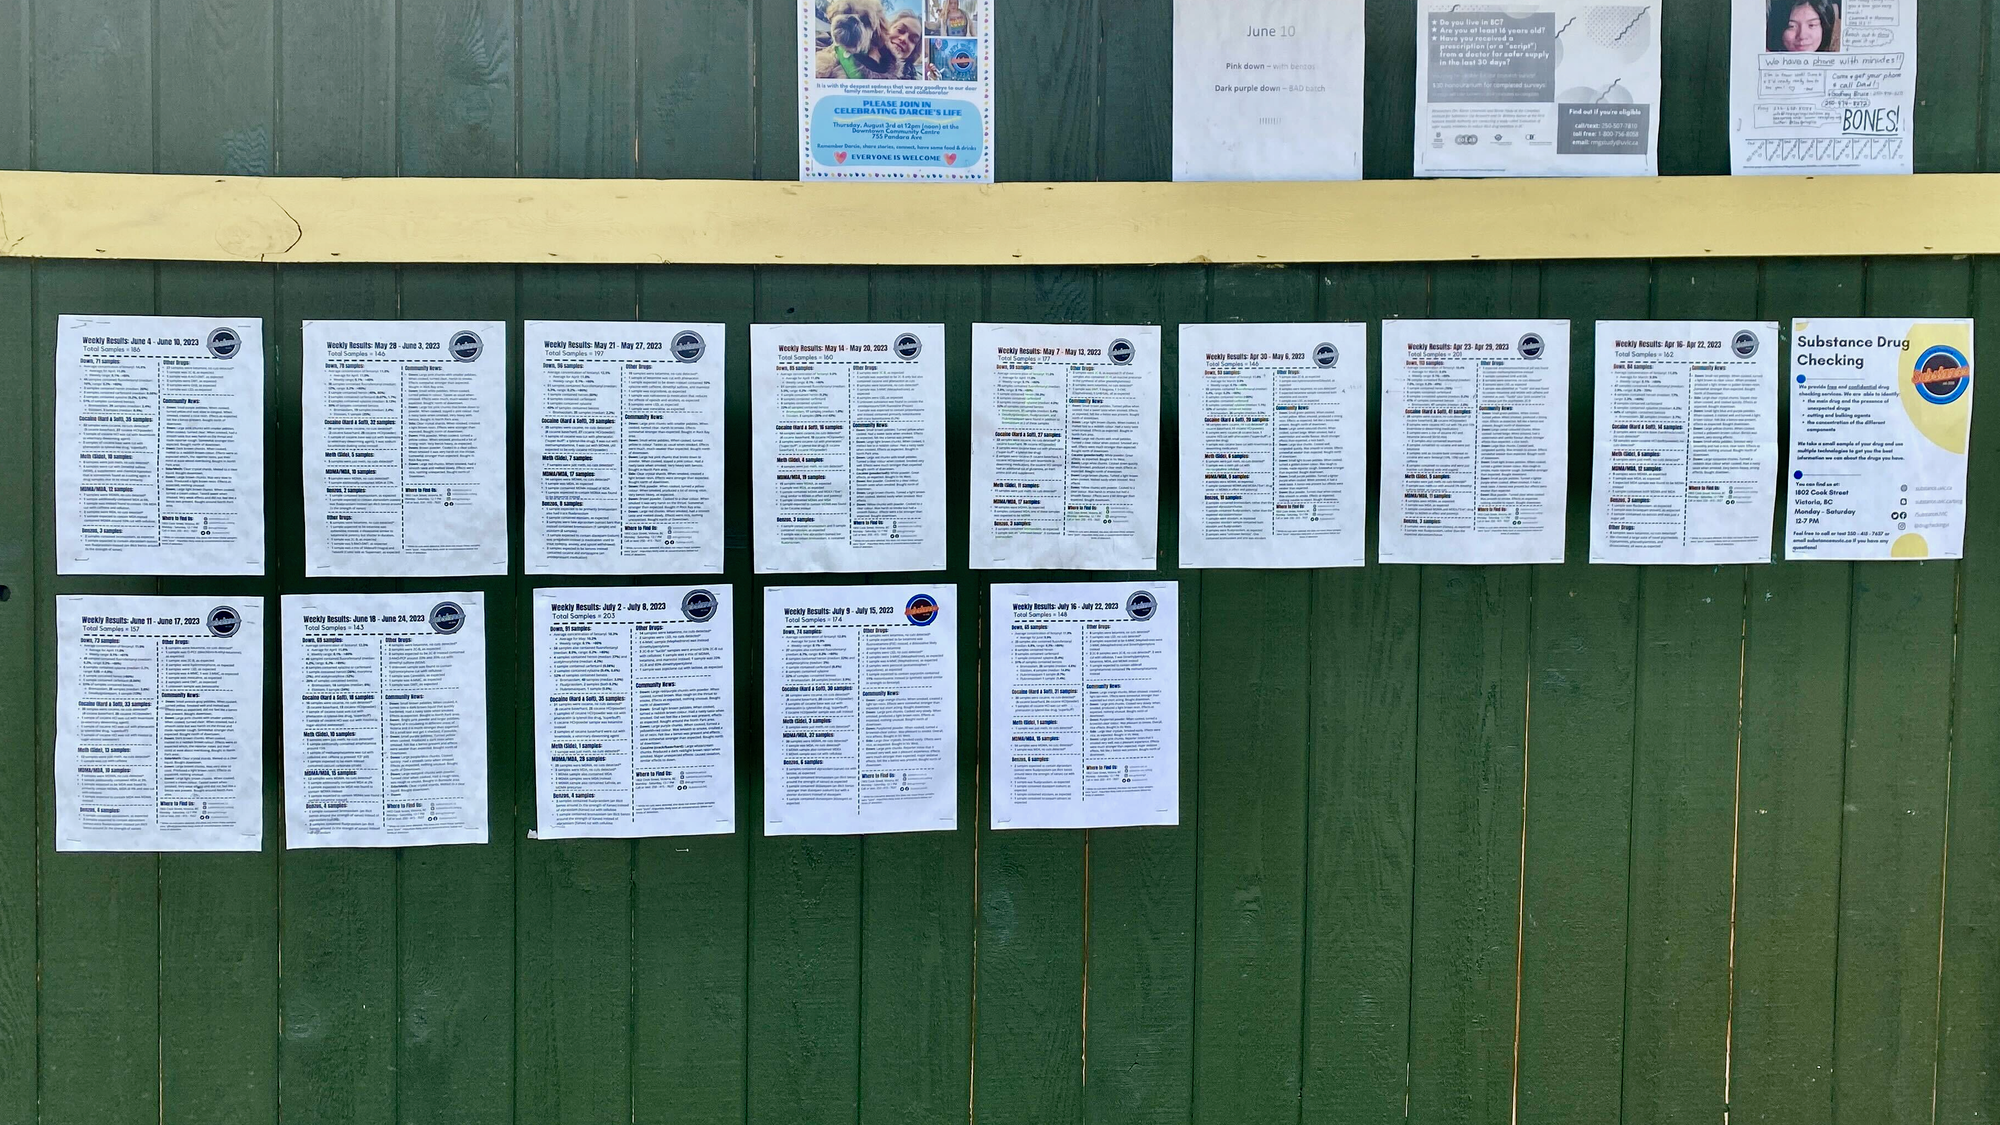 Substance Weekly Reports on display at Le Soleil, one of the housing site stops on Substance's weekly outreach route